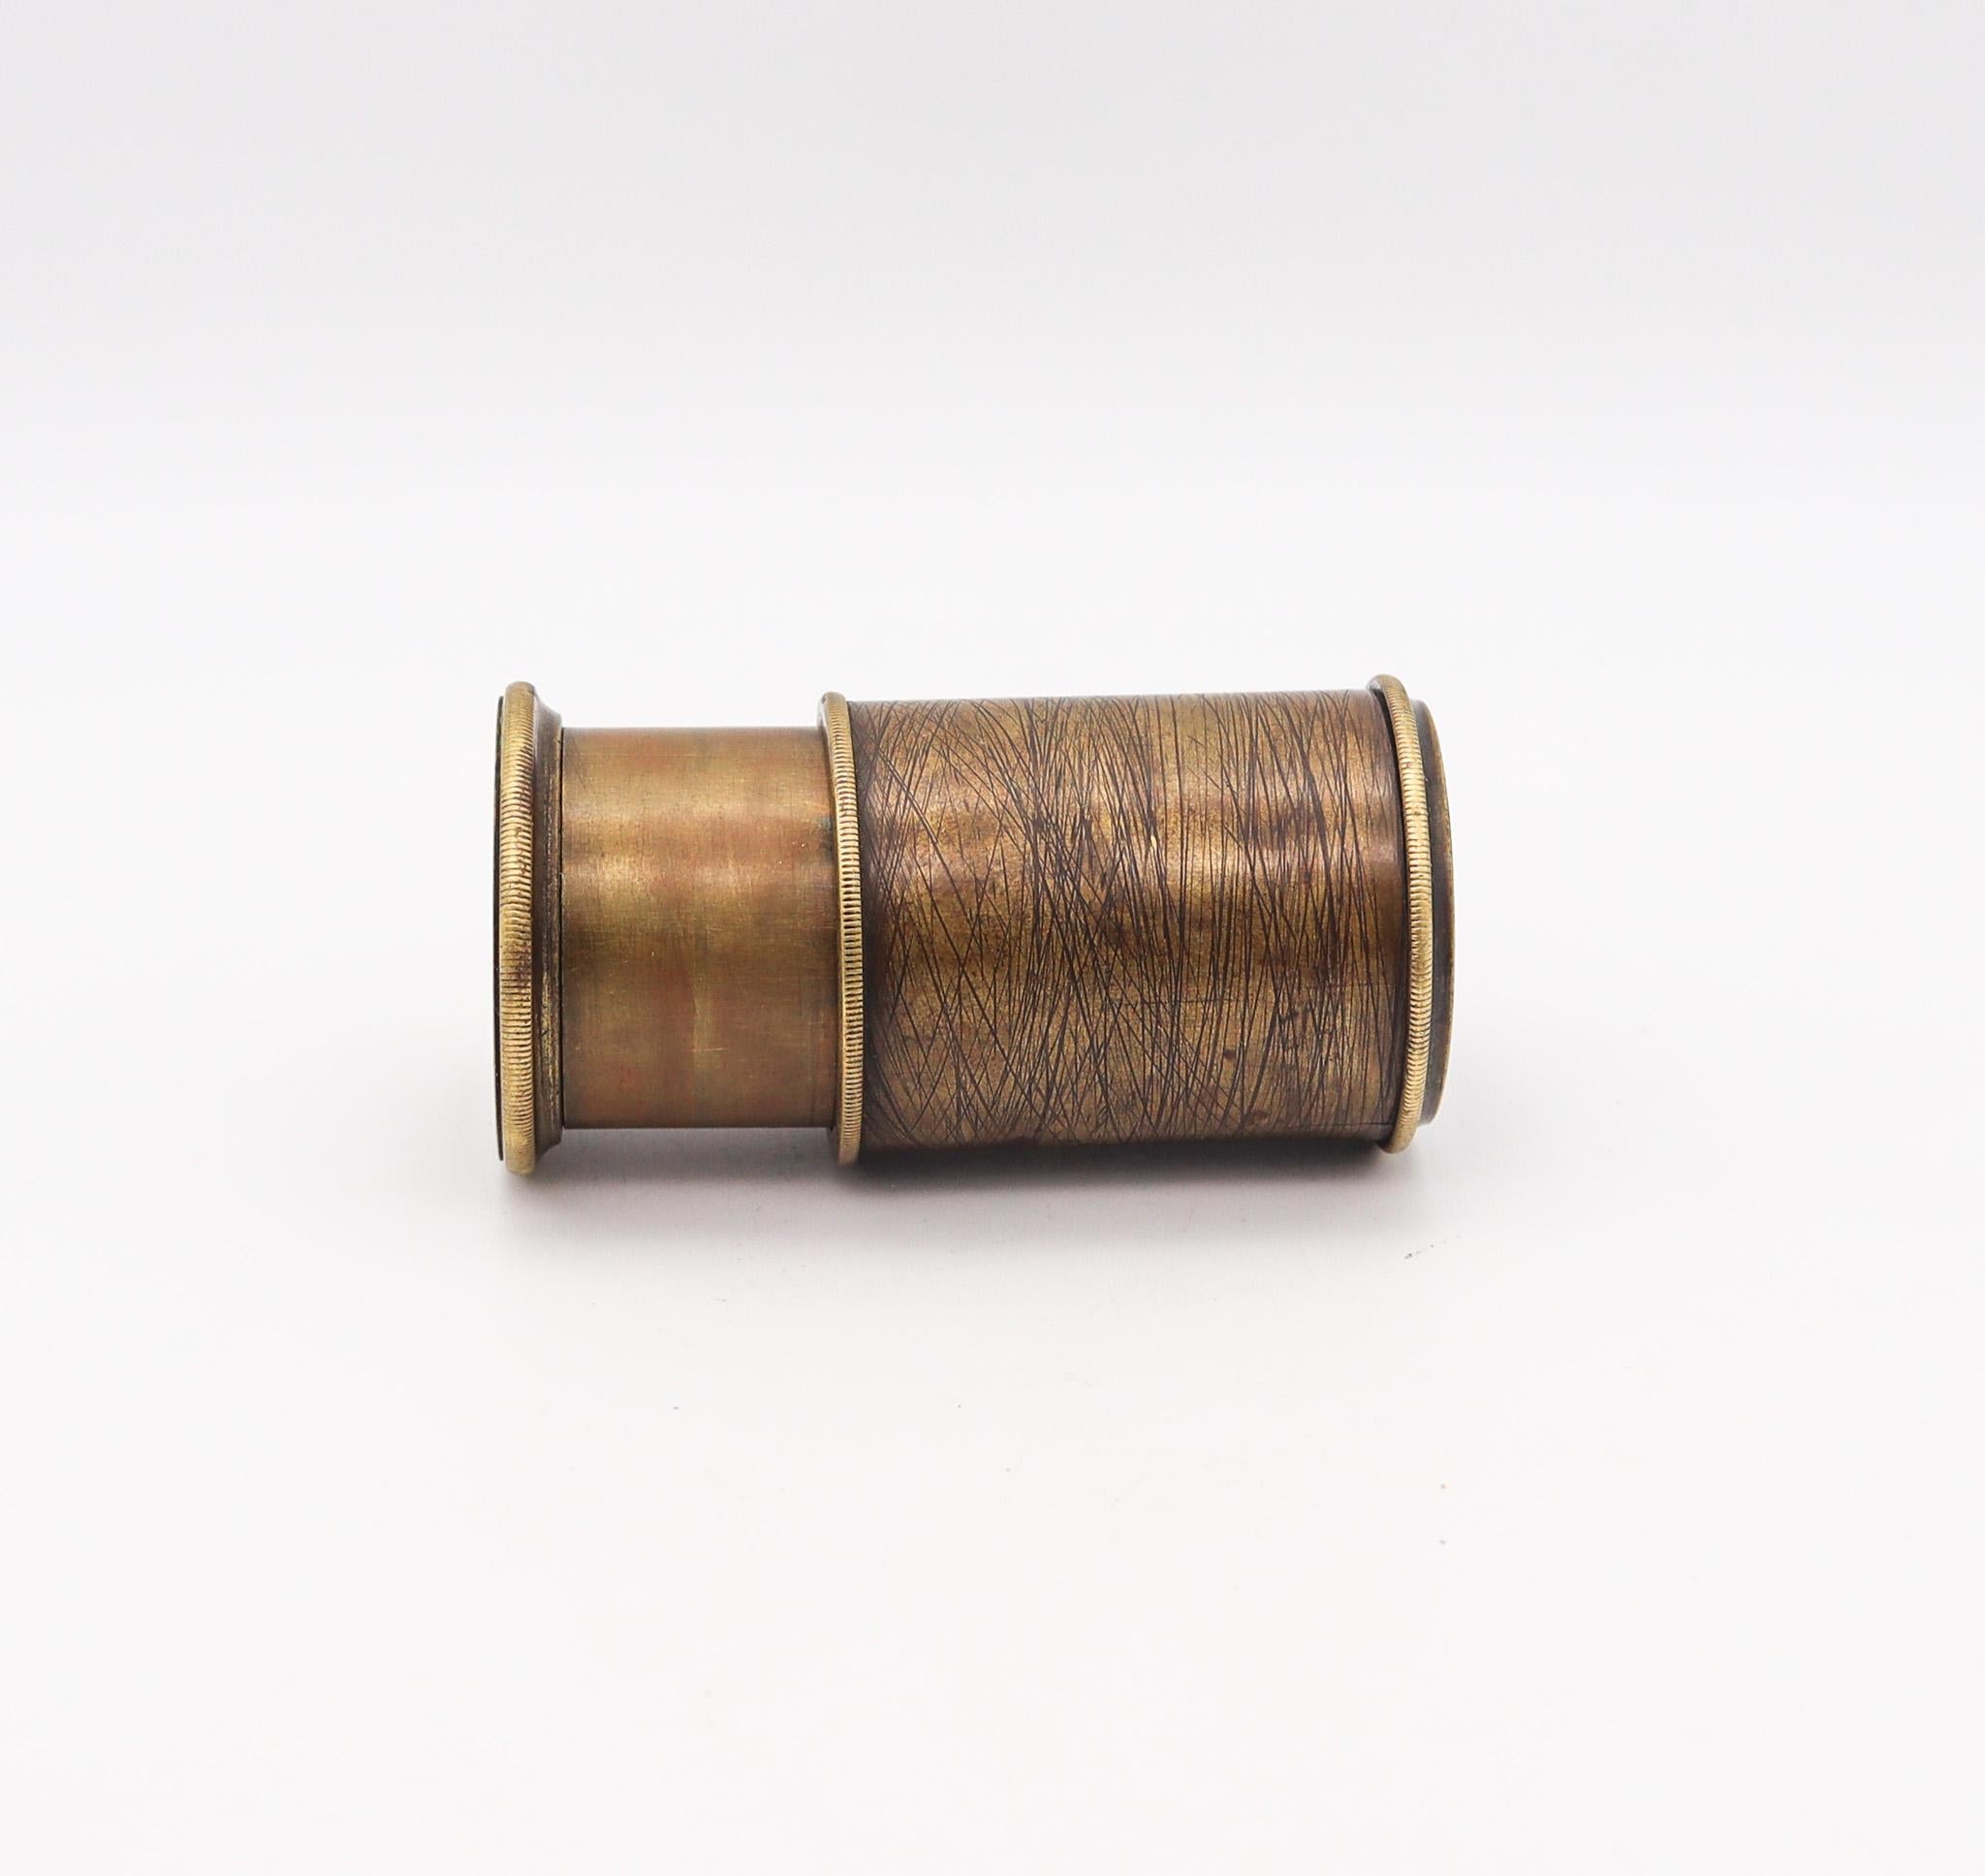 British two-Draws Monocular Telescope.

Beautiful monocular telescope, created in England during the Victorian era, in the last three-quarters of the 19th century, circa 1880. This is a monocular telescope, crafted with double draws in solid